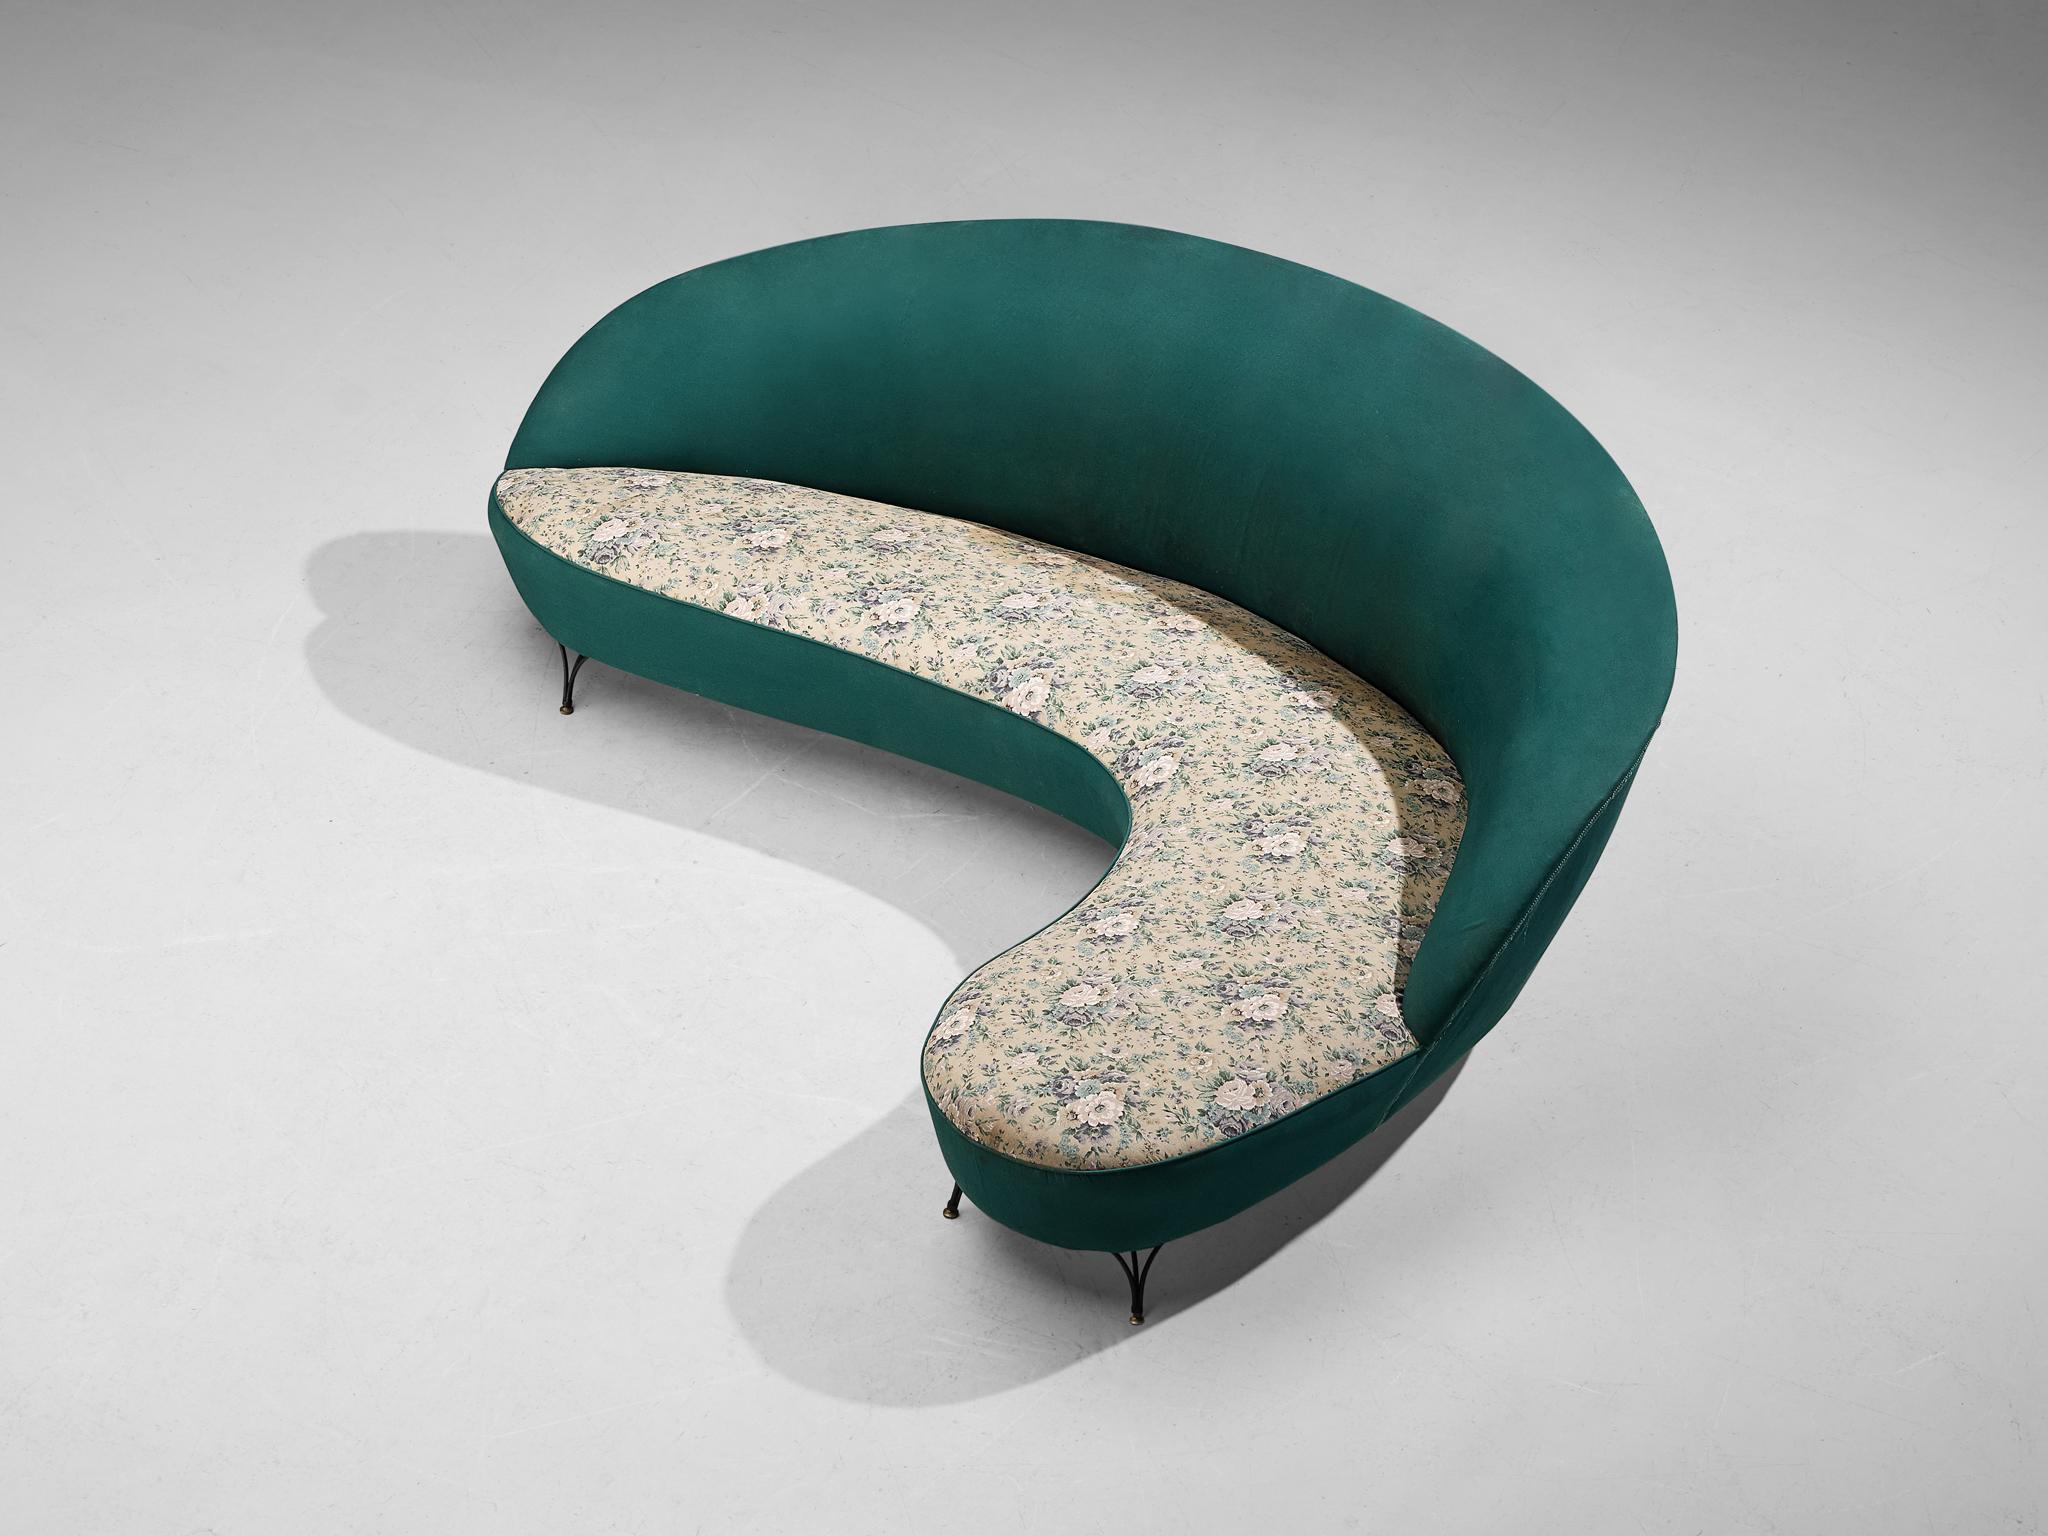 Sofa, fabric, metal, brass,Italy, 1950s

This eccentric sofa features an interesting composition. The seating area and the backrest are organically shaped and together with the absence of strict angles, the sofa attains a sculptural expression.